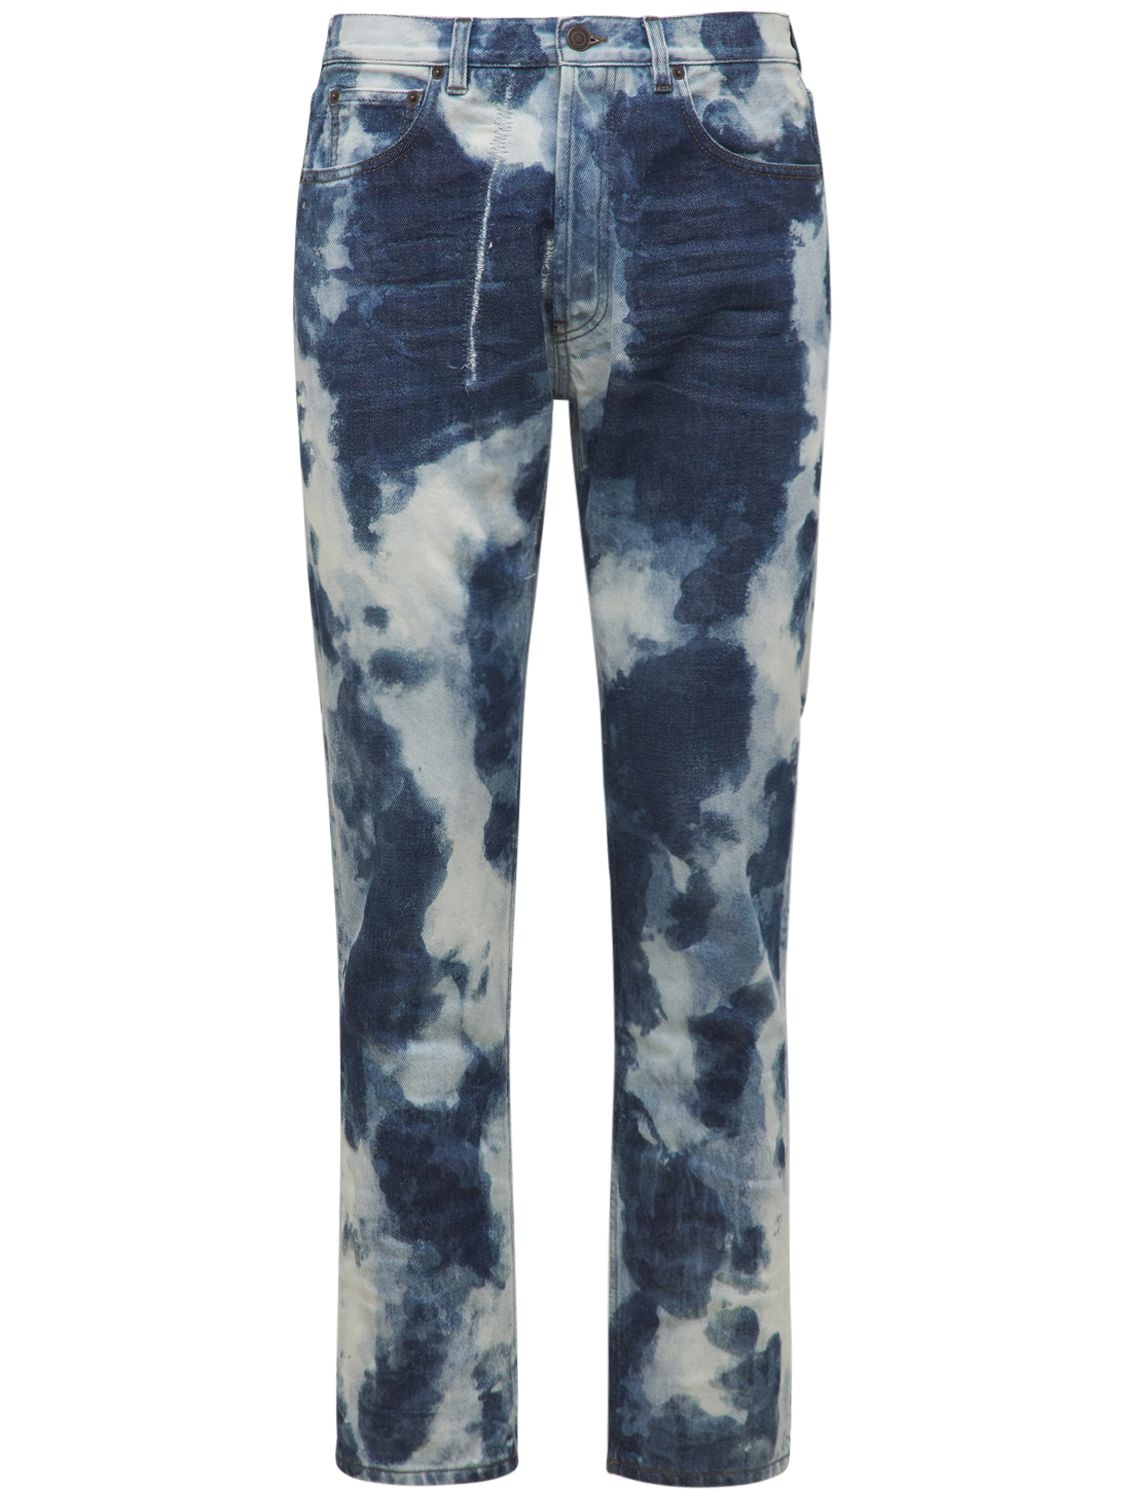 COOL TM Bleach Washed Jeans